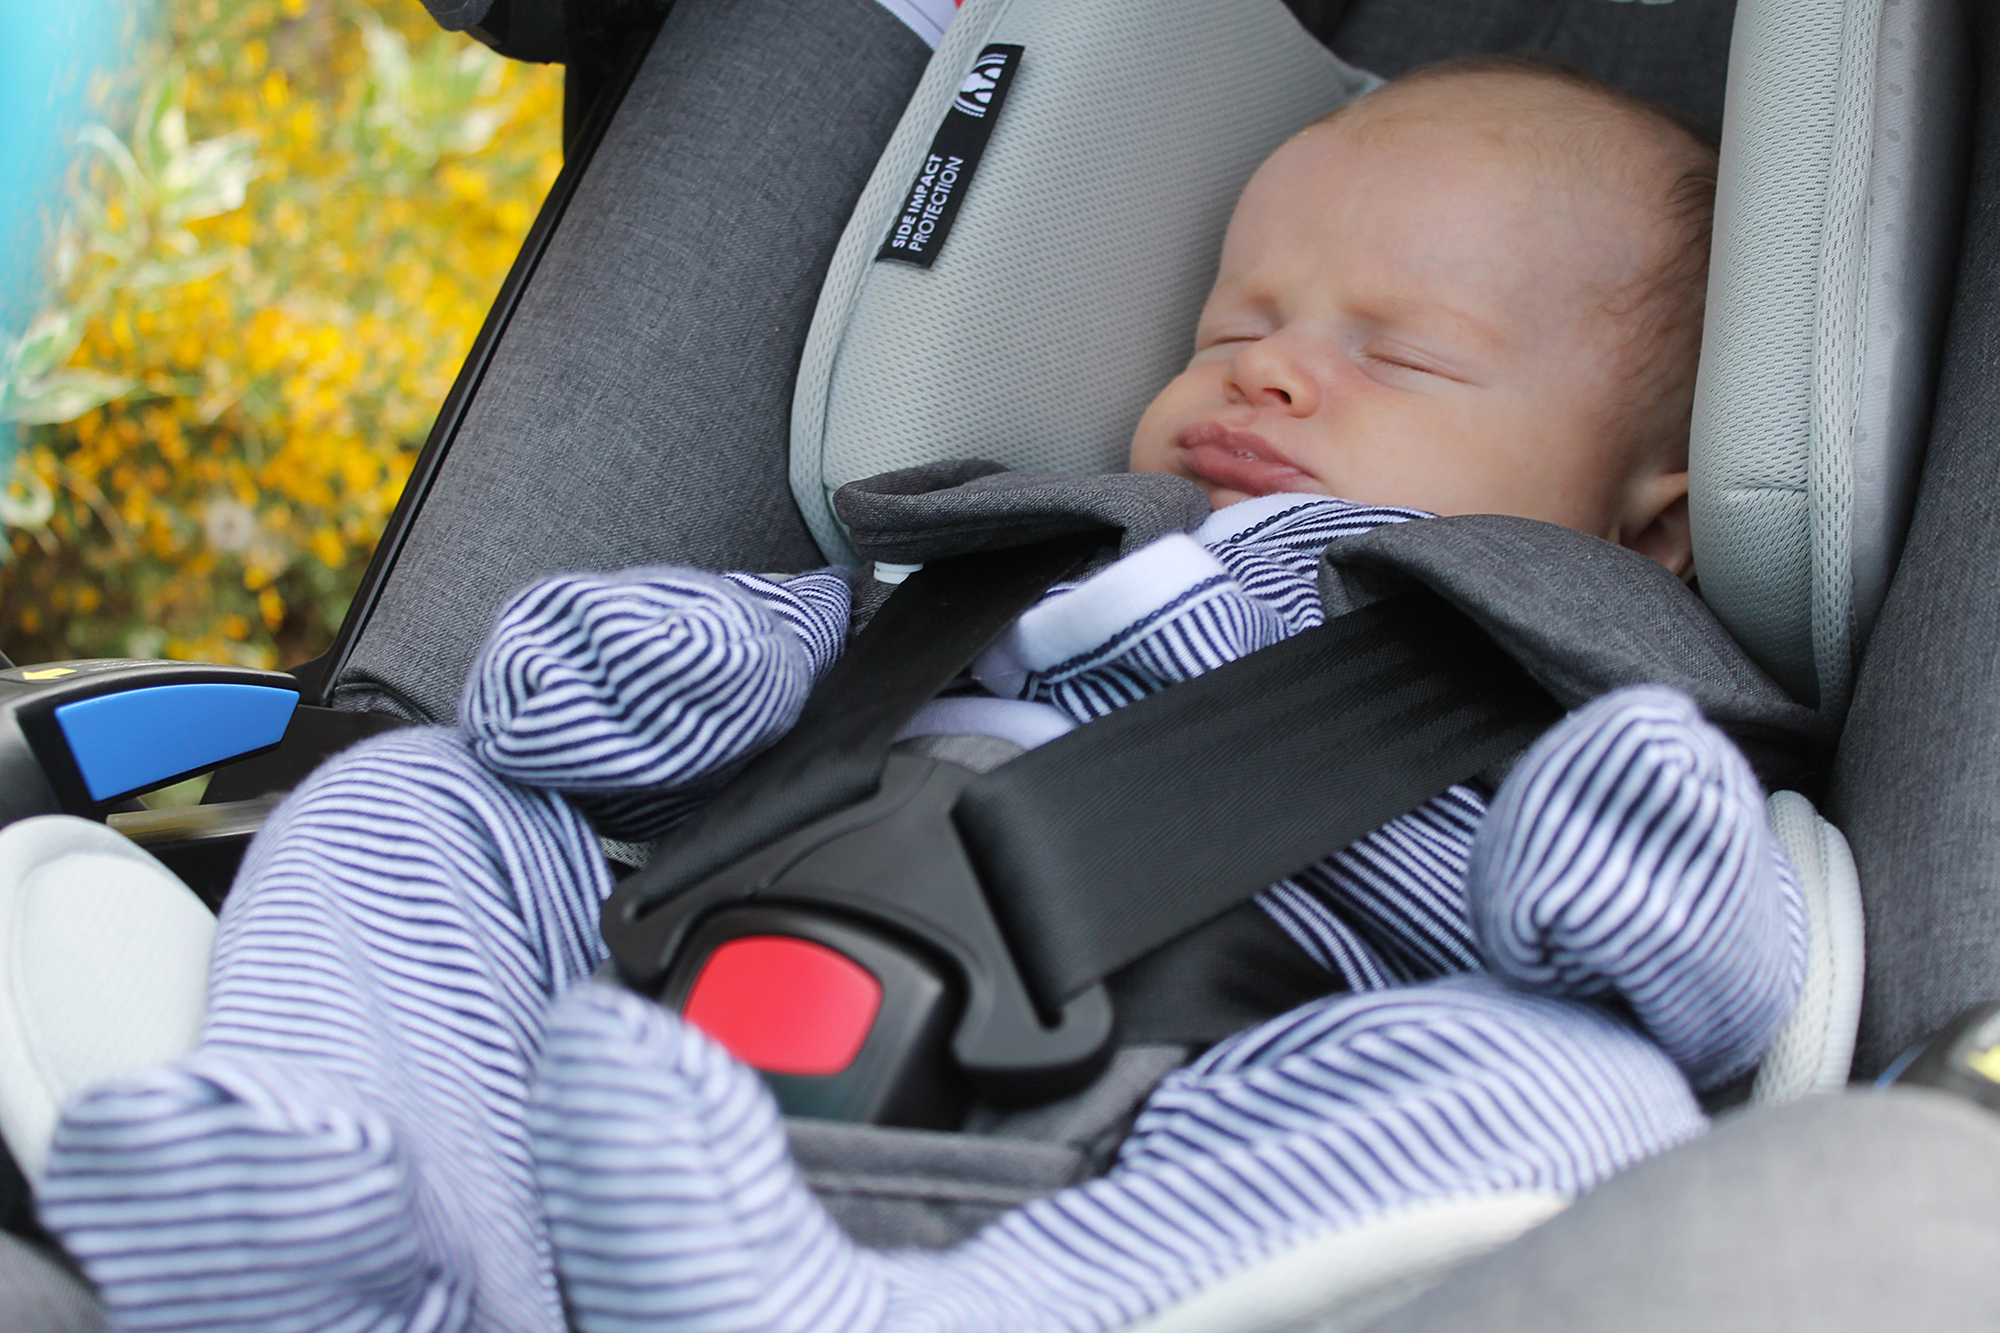 A baby in a striped sleep suit asleep in a car seat